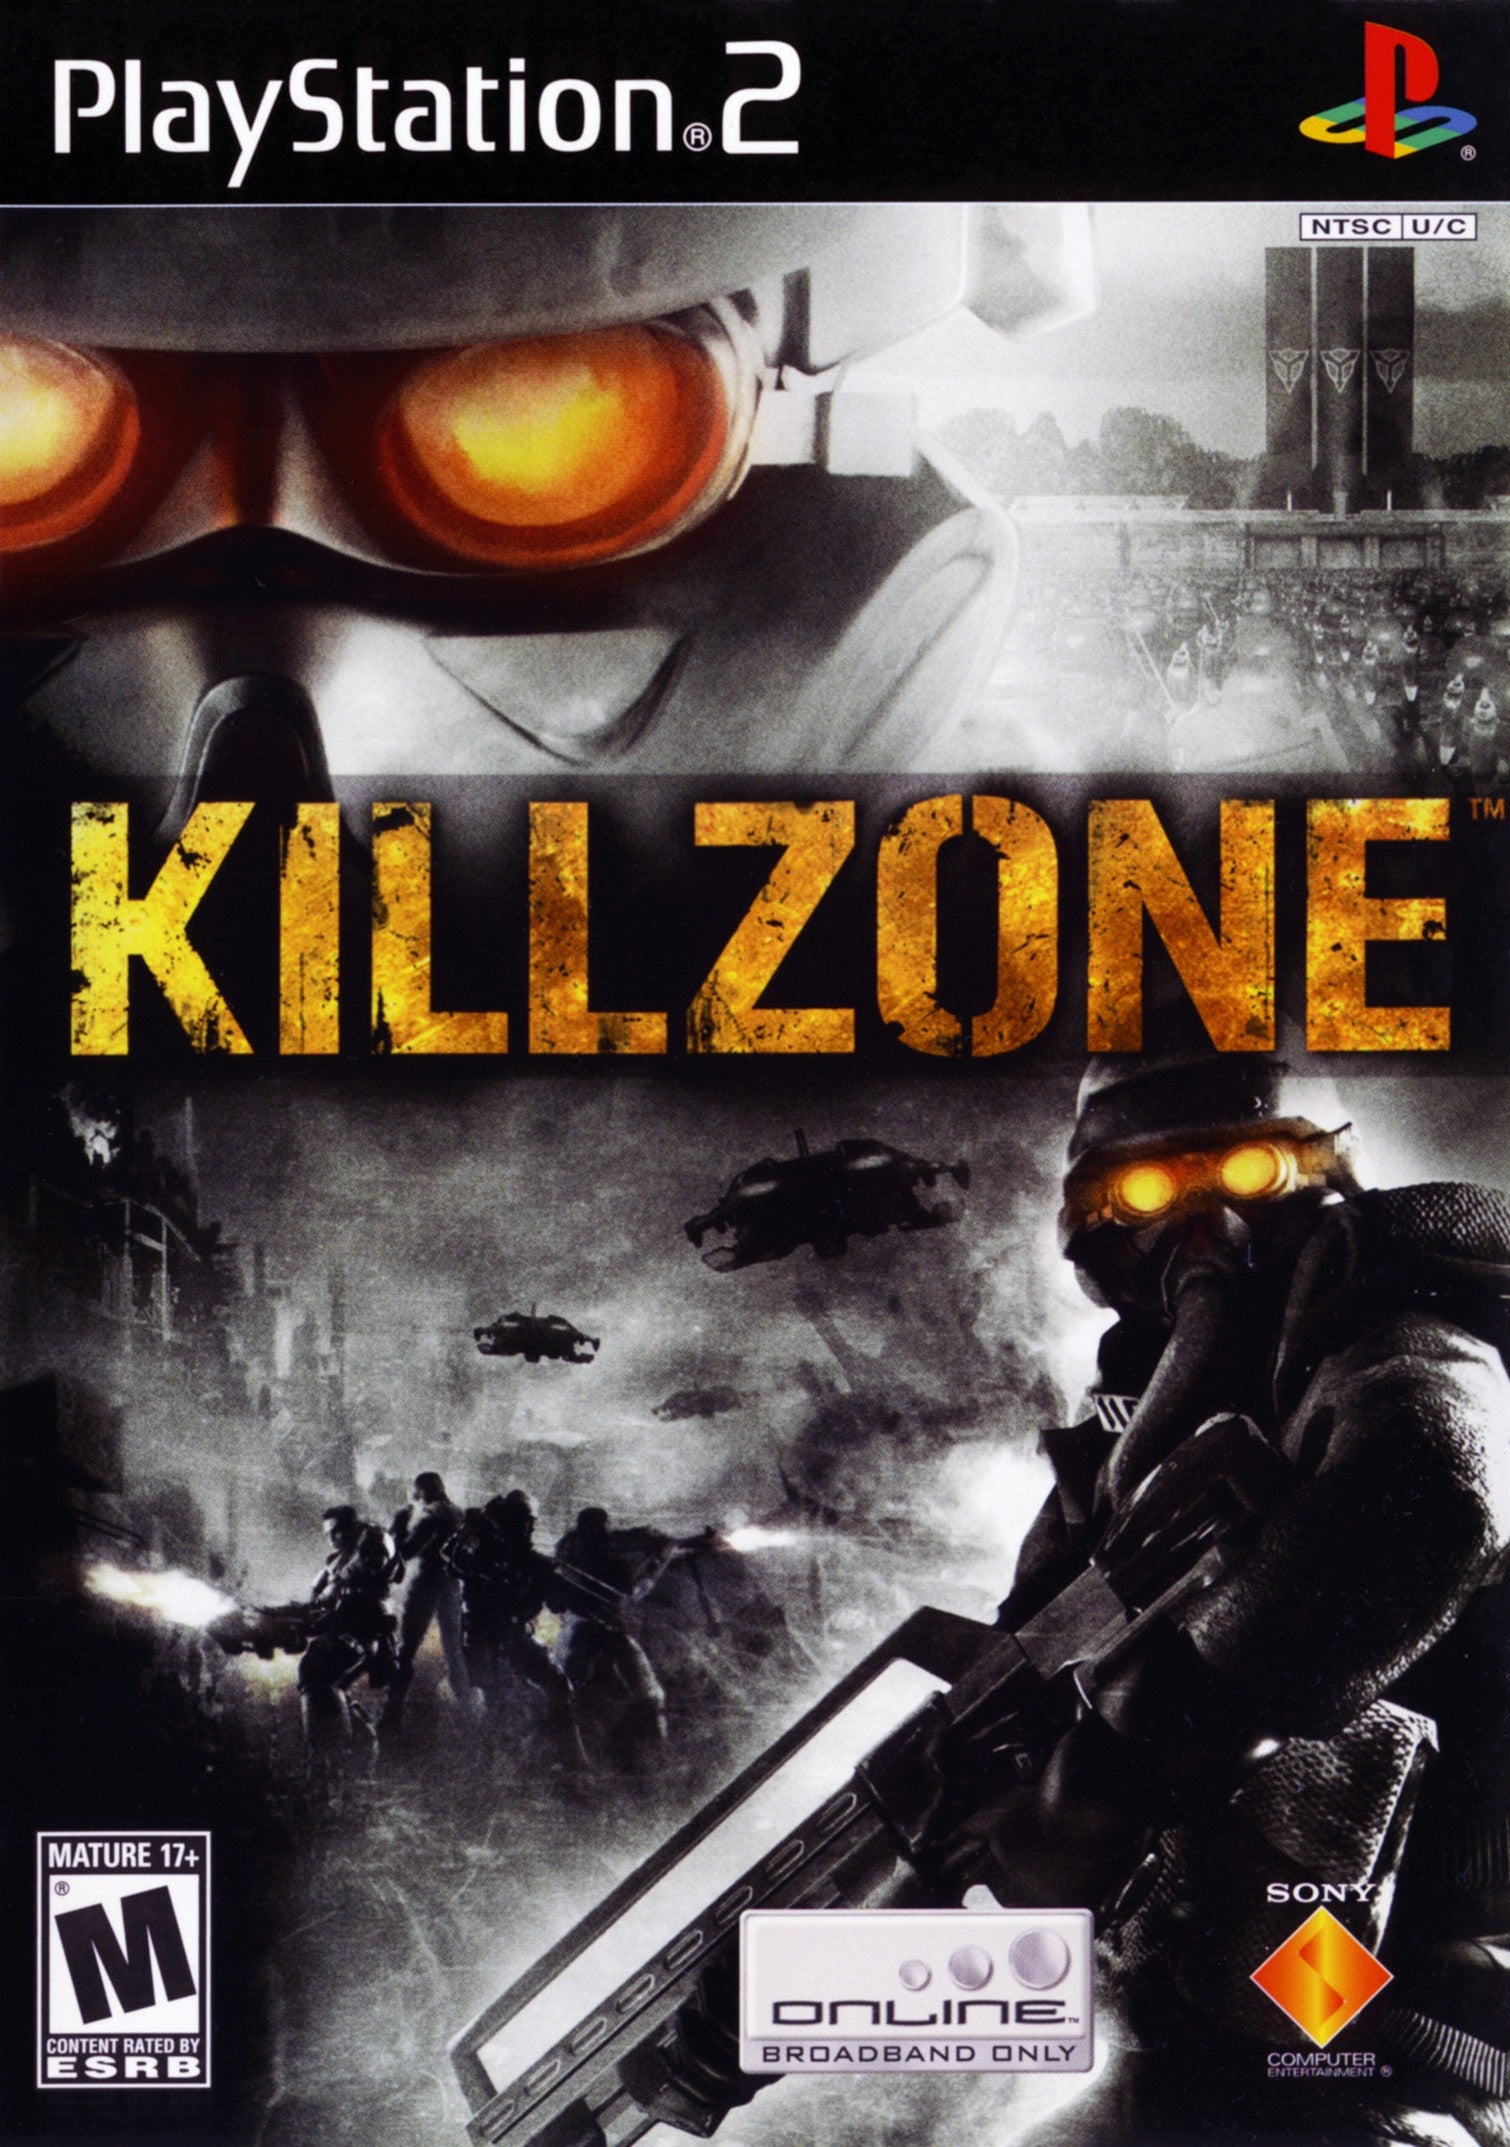 Killzone - PlayStation 2 (PS2) Game - YourGamingShop.com - Buy, Sell, Trade Video Games Online. 120 Day Warranty. Satisfaction Guaranteed.